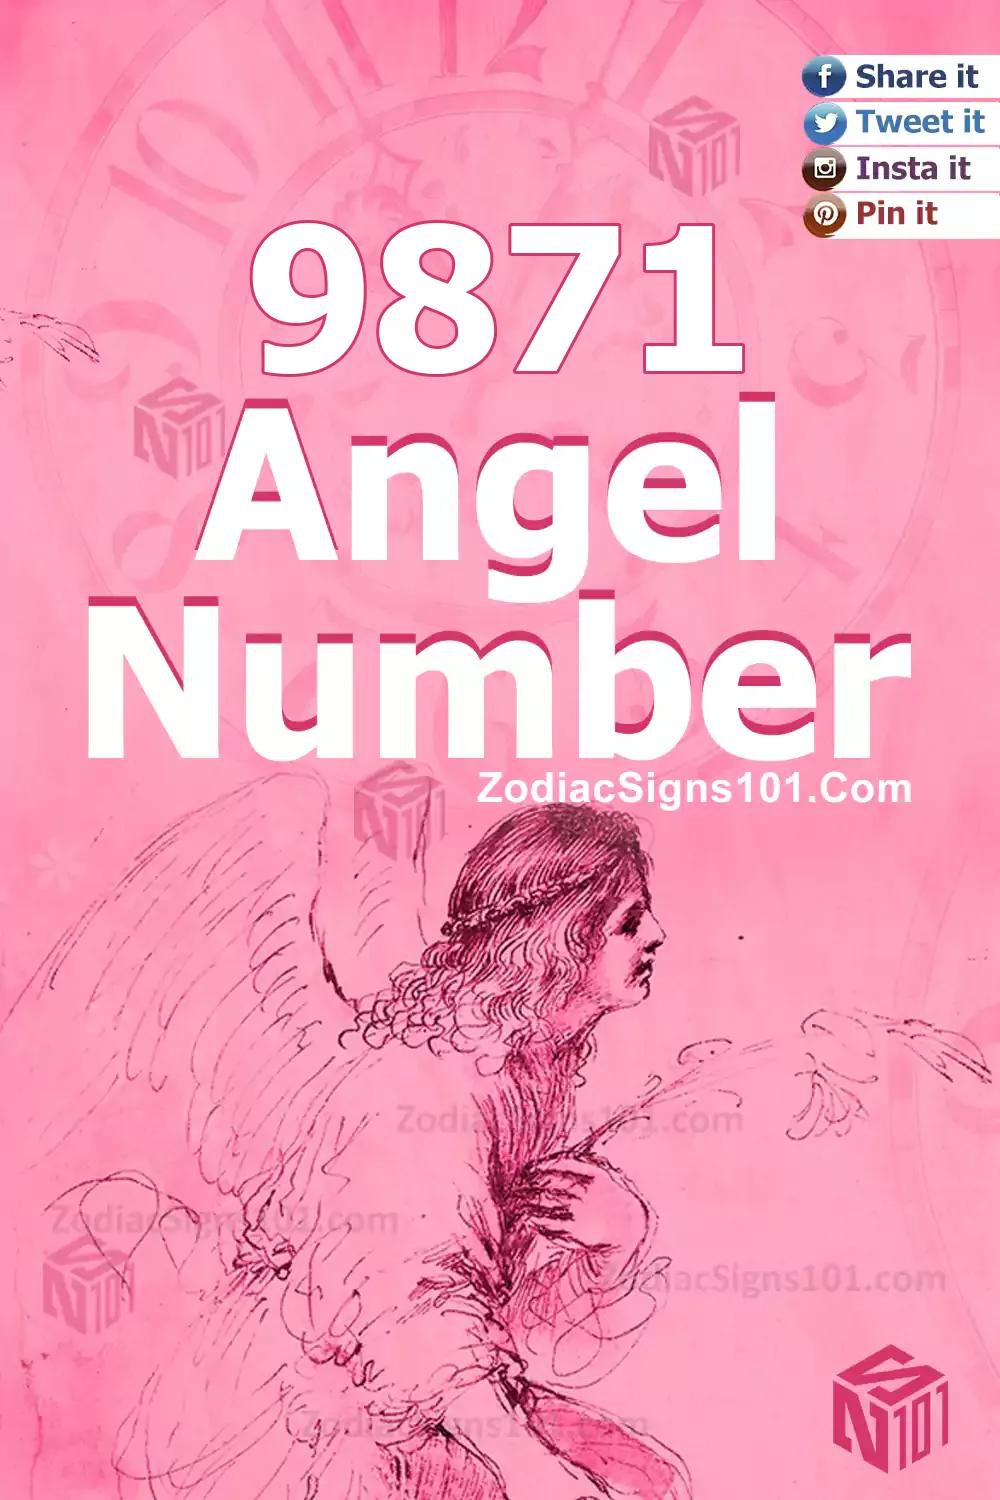 9871 Angel Number Meaning